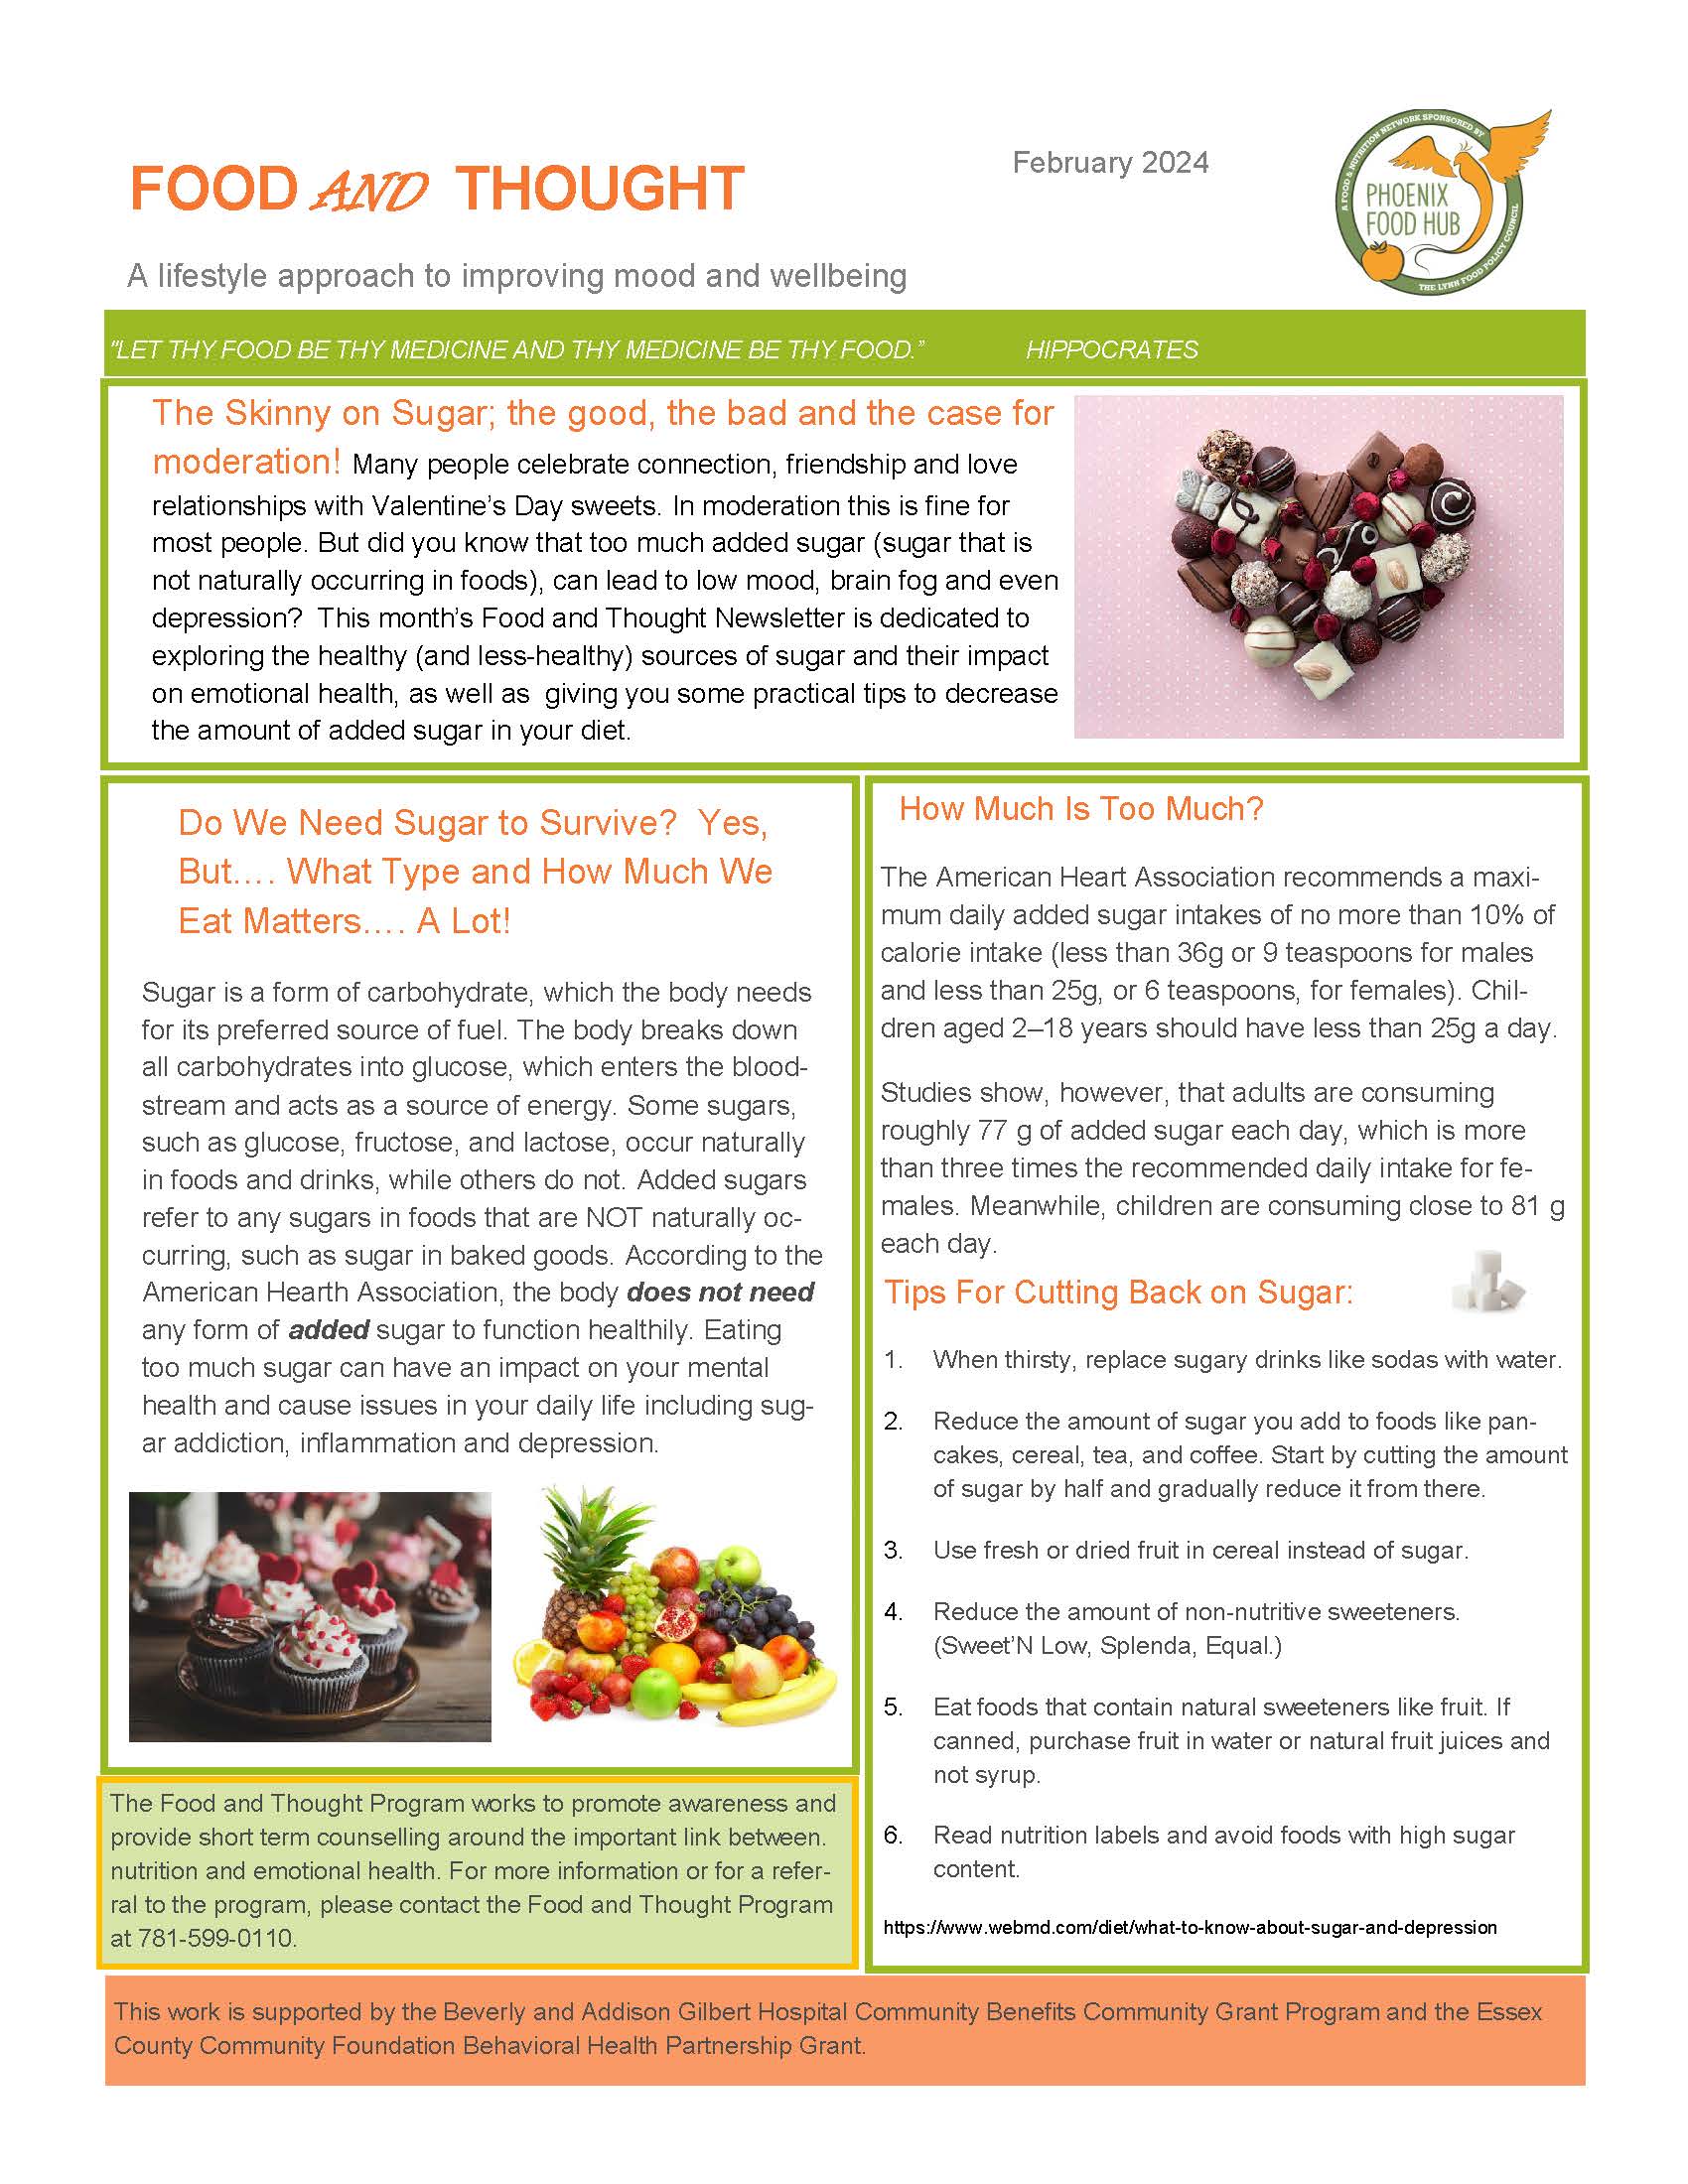 Food And Thought February 2024 Newsletter_English.jpg